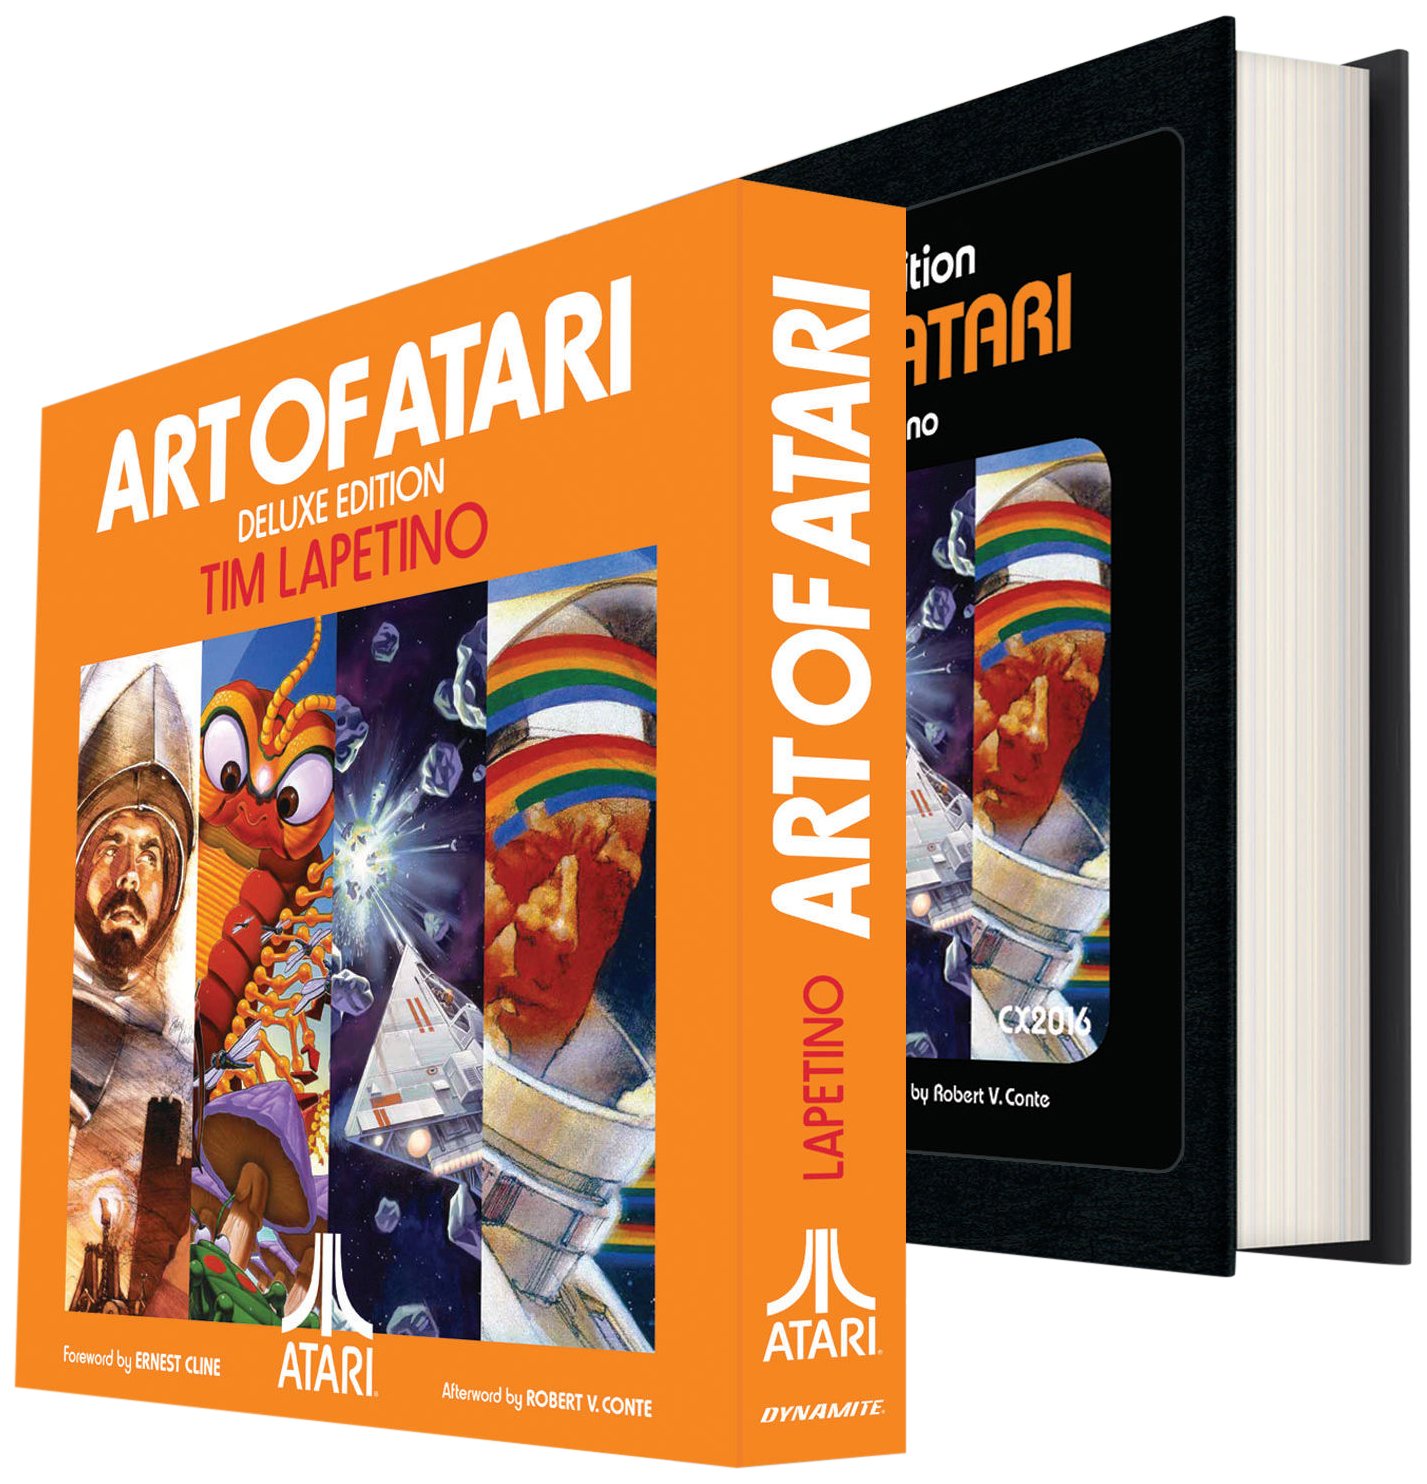 Art of Atari Limited Deluxe Edition